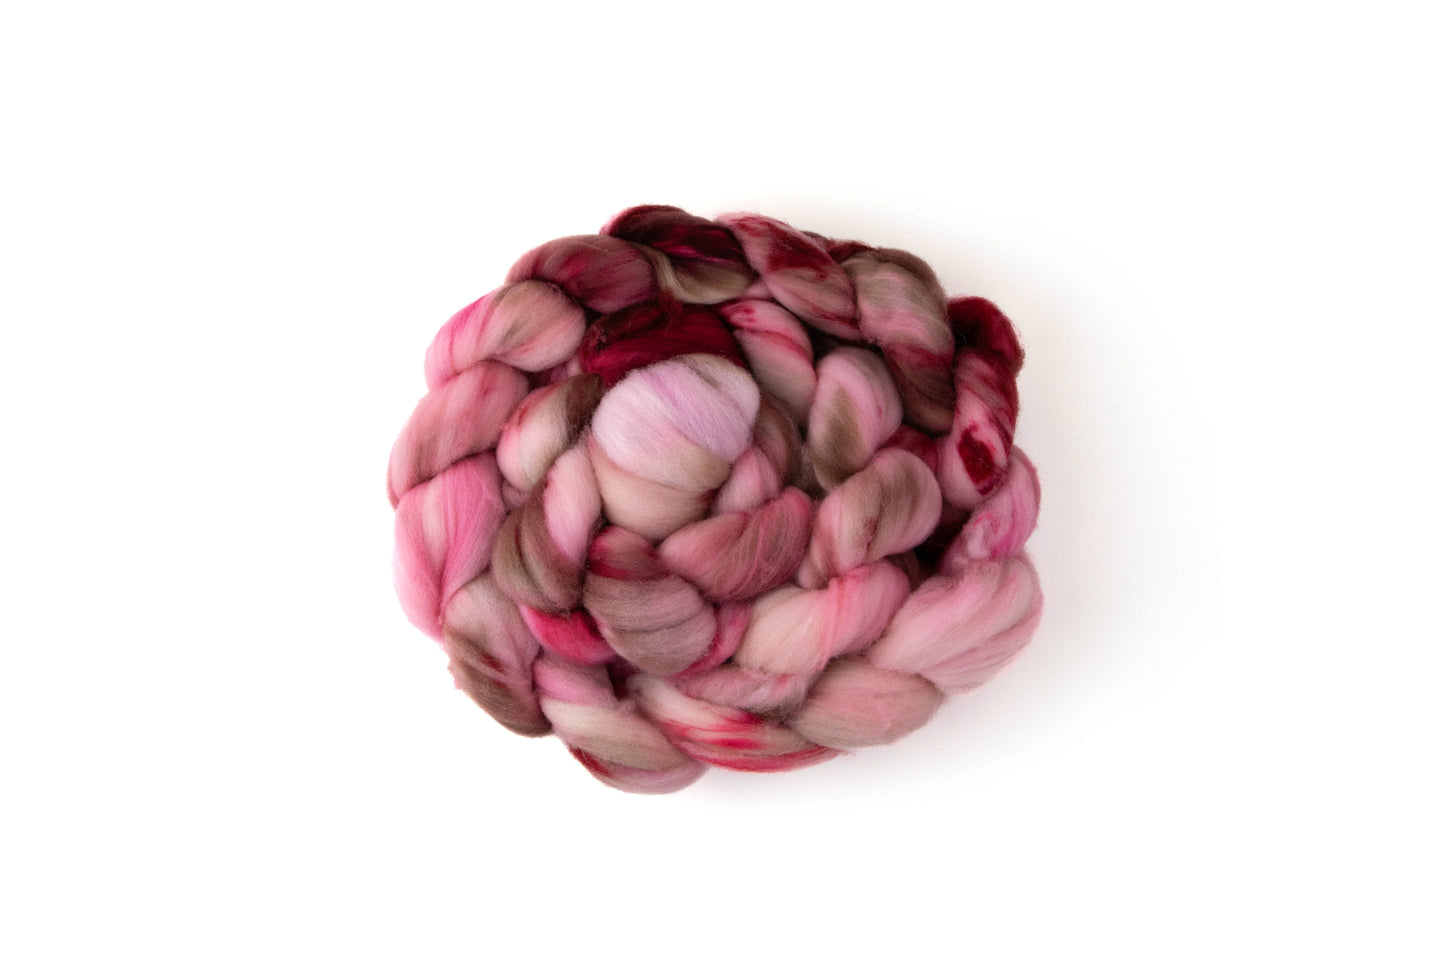 A braid of fiber in pink, red, and brown colors.